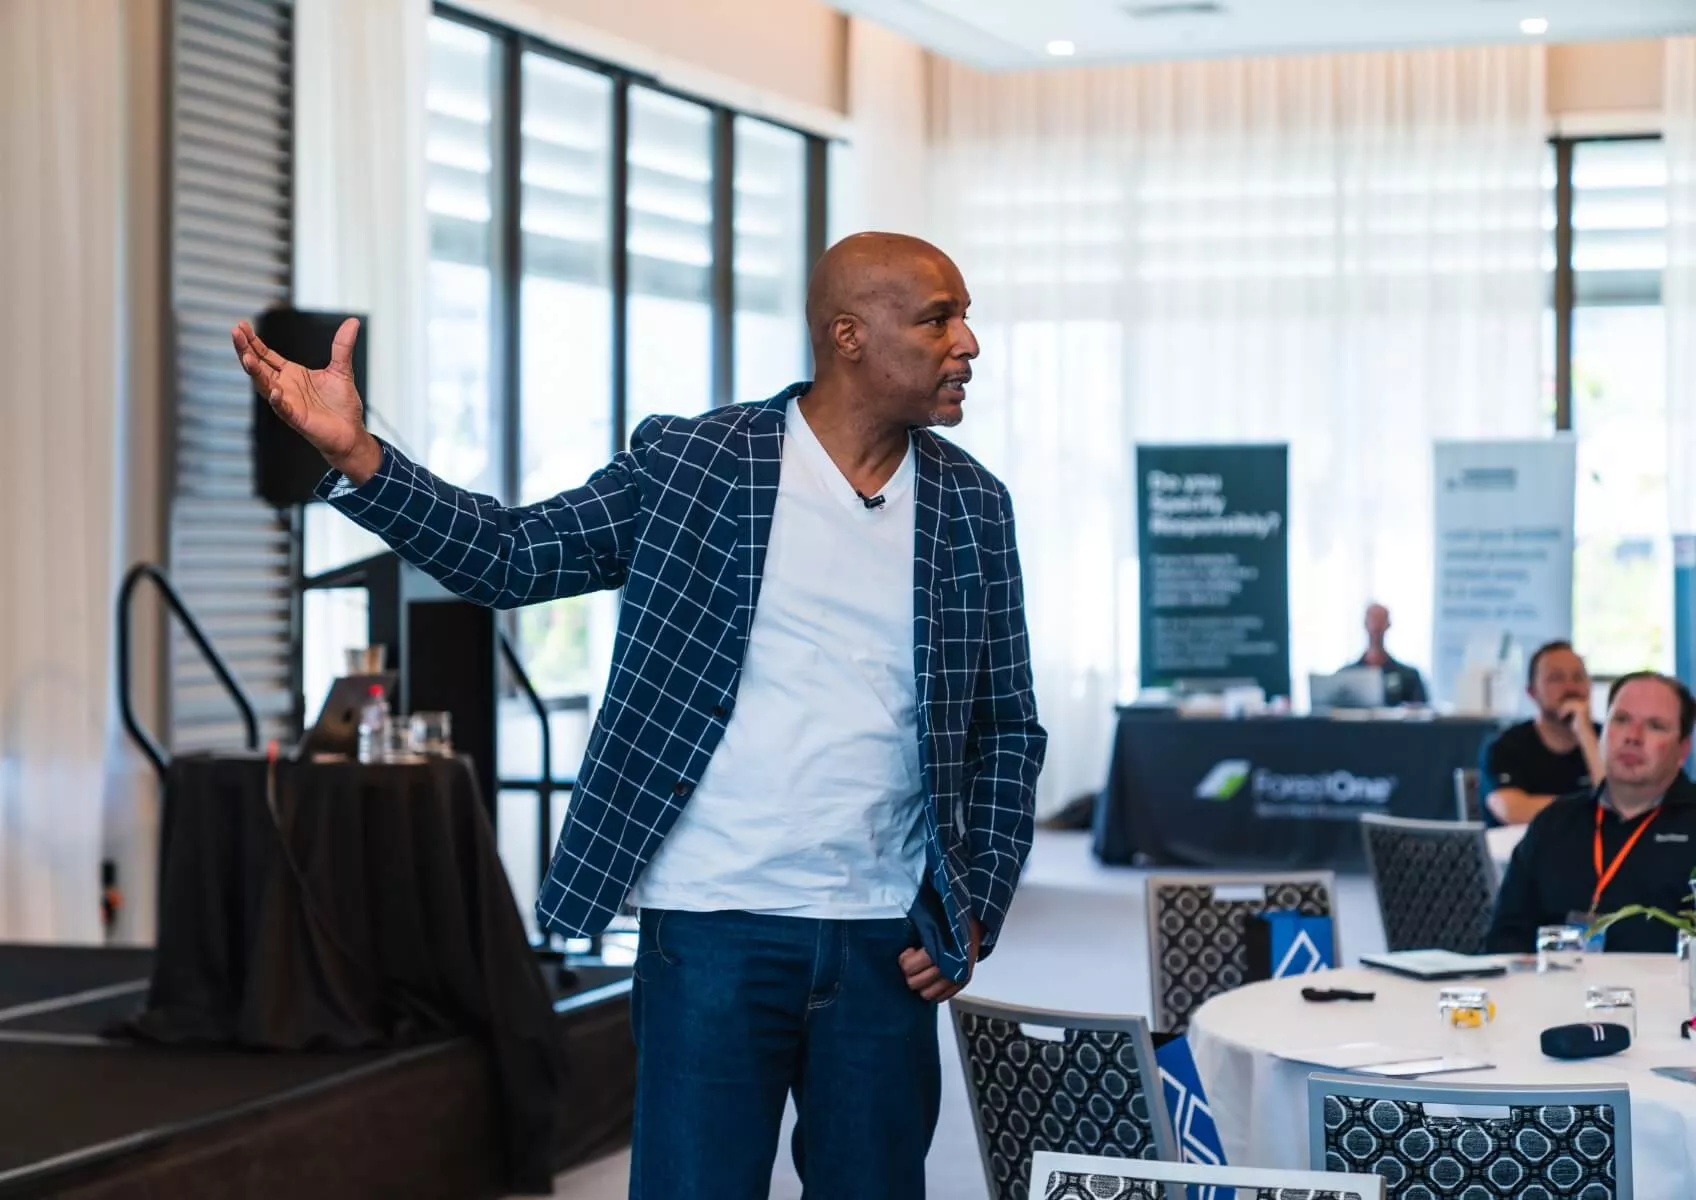 Eric Bailey provides a post-event video, Powerful Reminder, Motivates Attendees, Personal and Professional Growth Journey | Eric Bailey Global